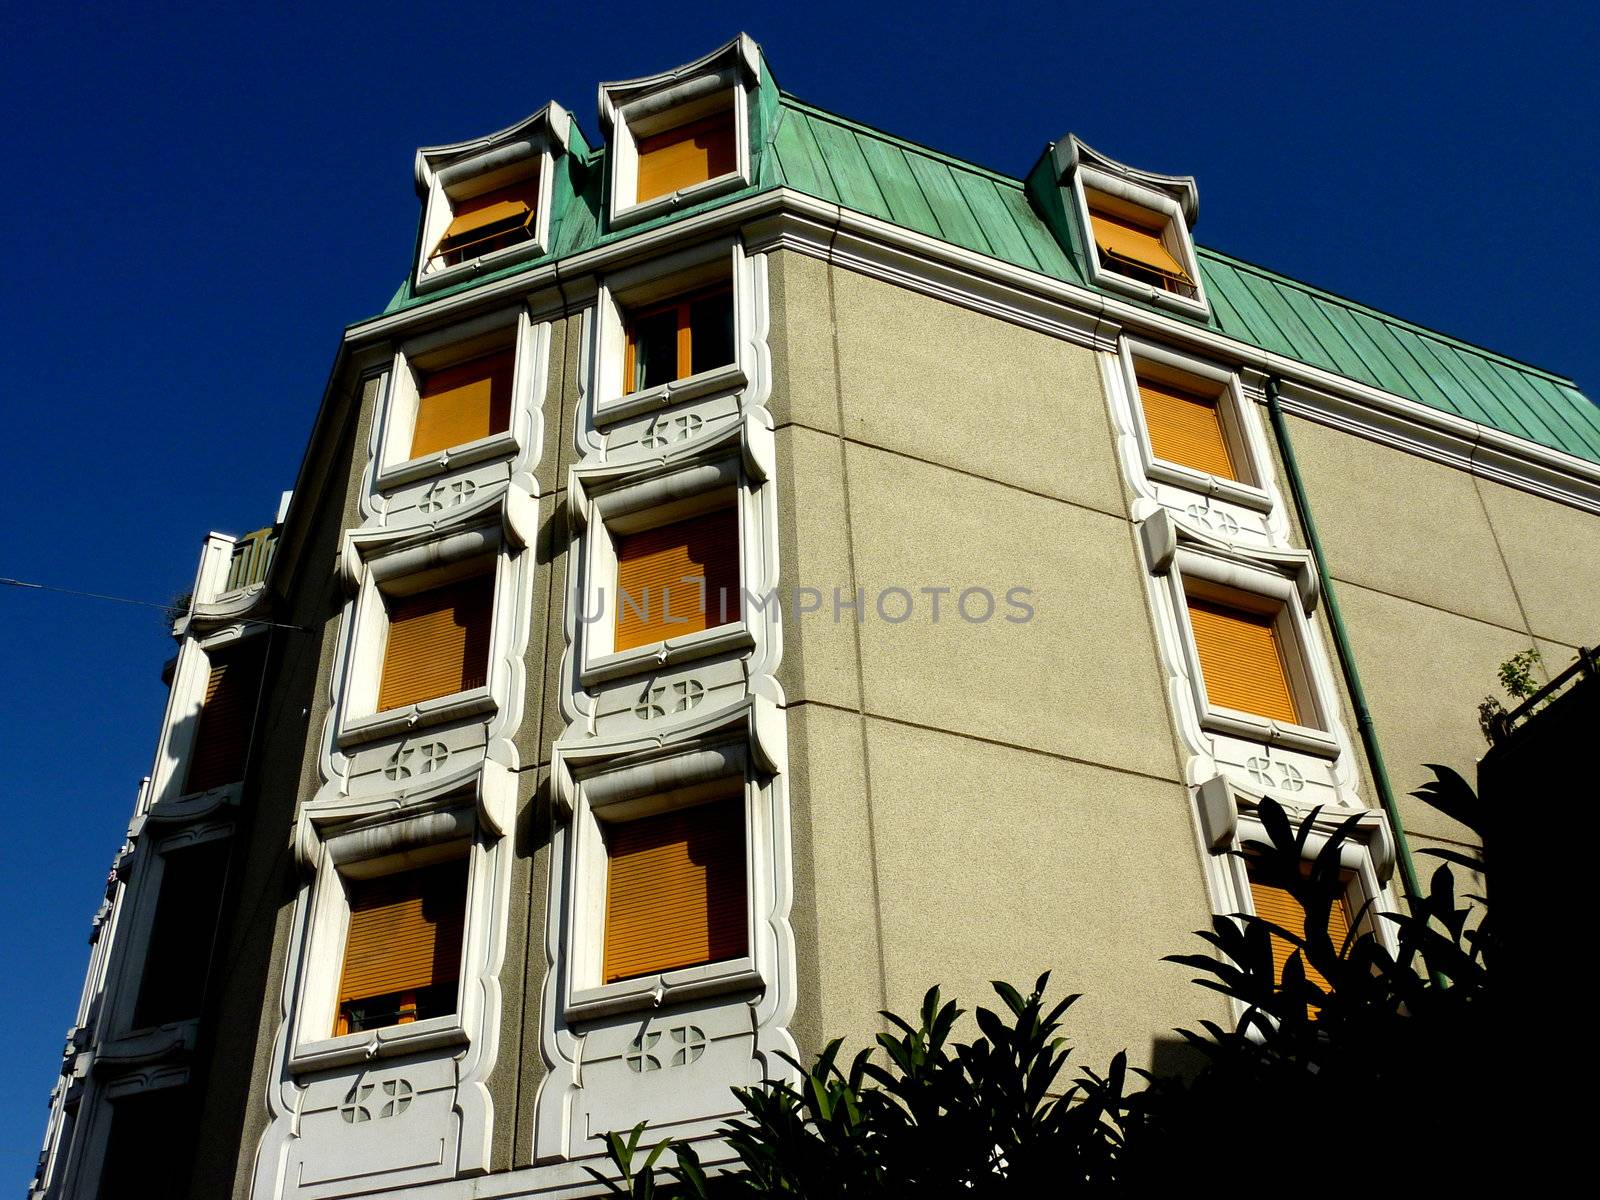 Original facade of a building with green roof and yello windows by beautiful weather